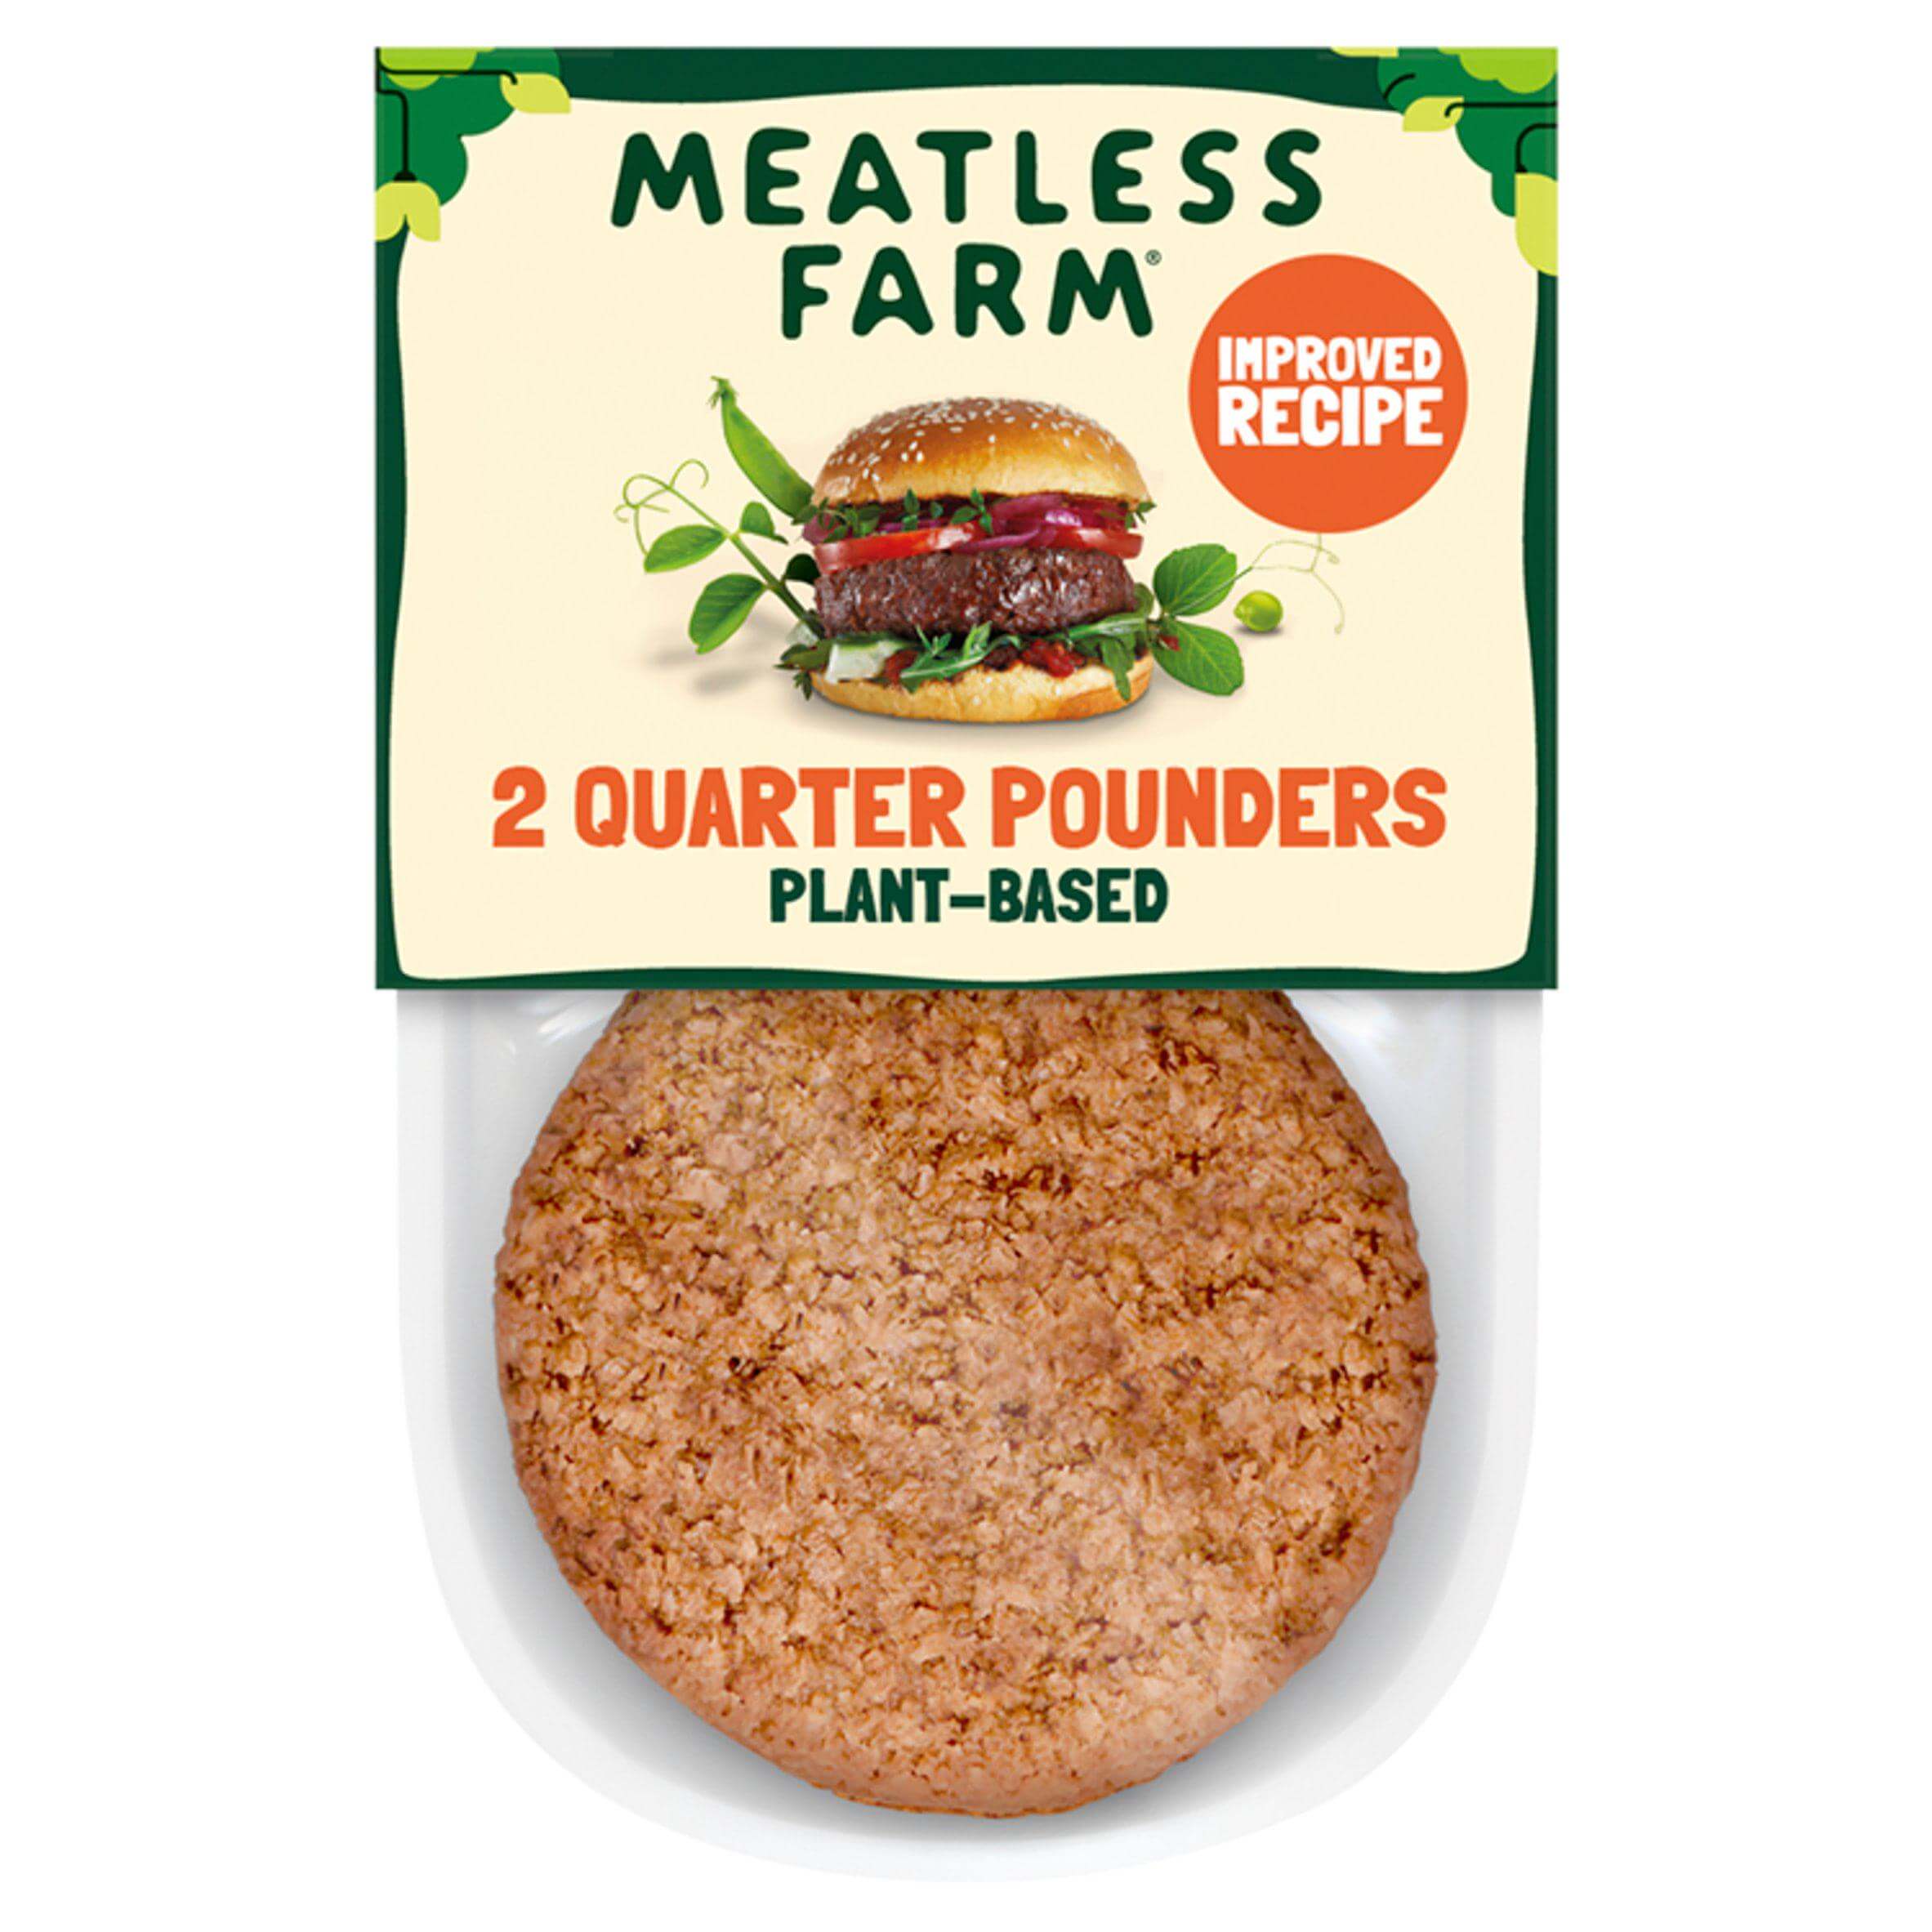 Image of 2 Plant Based Quarter Pounders by The Meatless Farm Co., designed, produced or made in the UK. Buying this product supports a UK business, jobs and the local community.